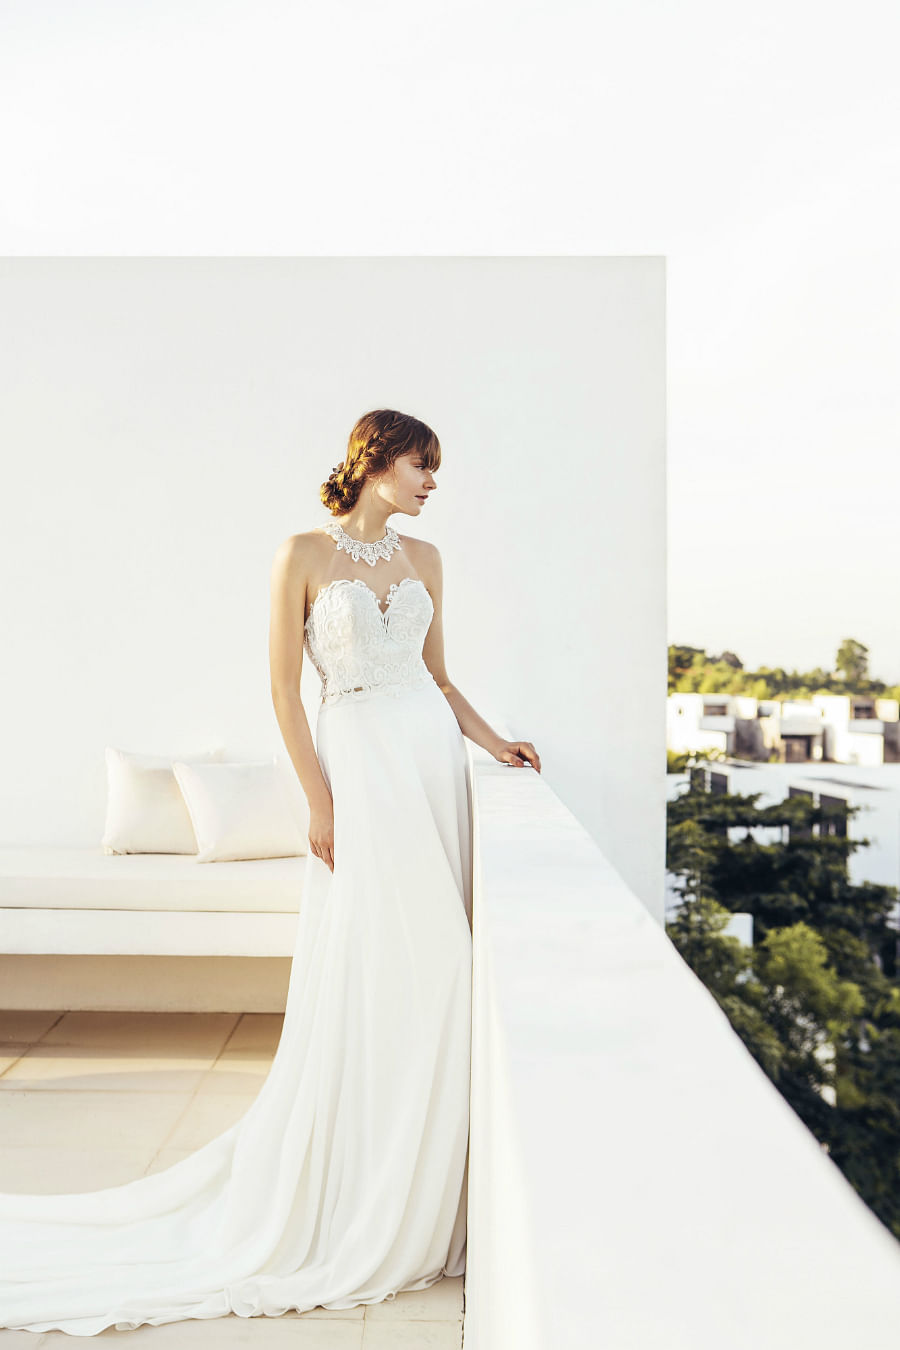 The best wedding dress styles for every body shape - Her World Singapore